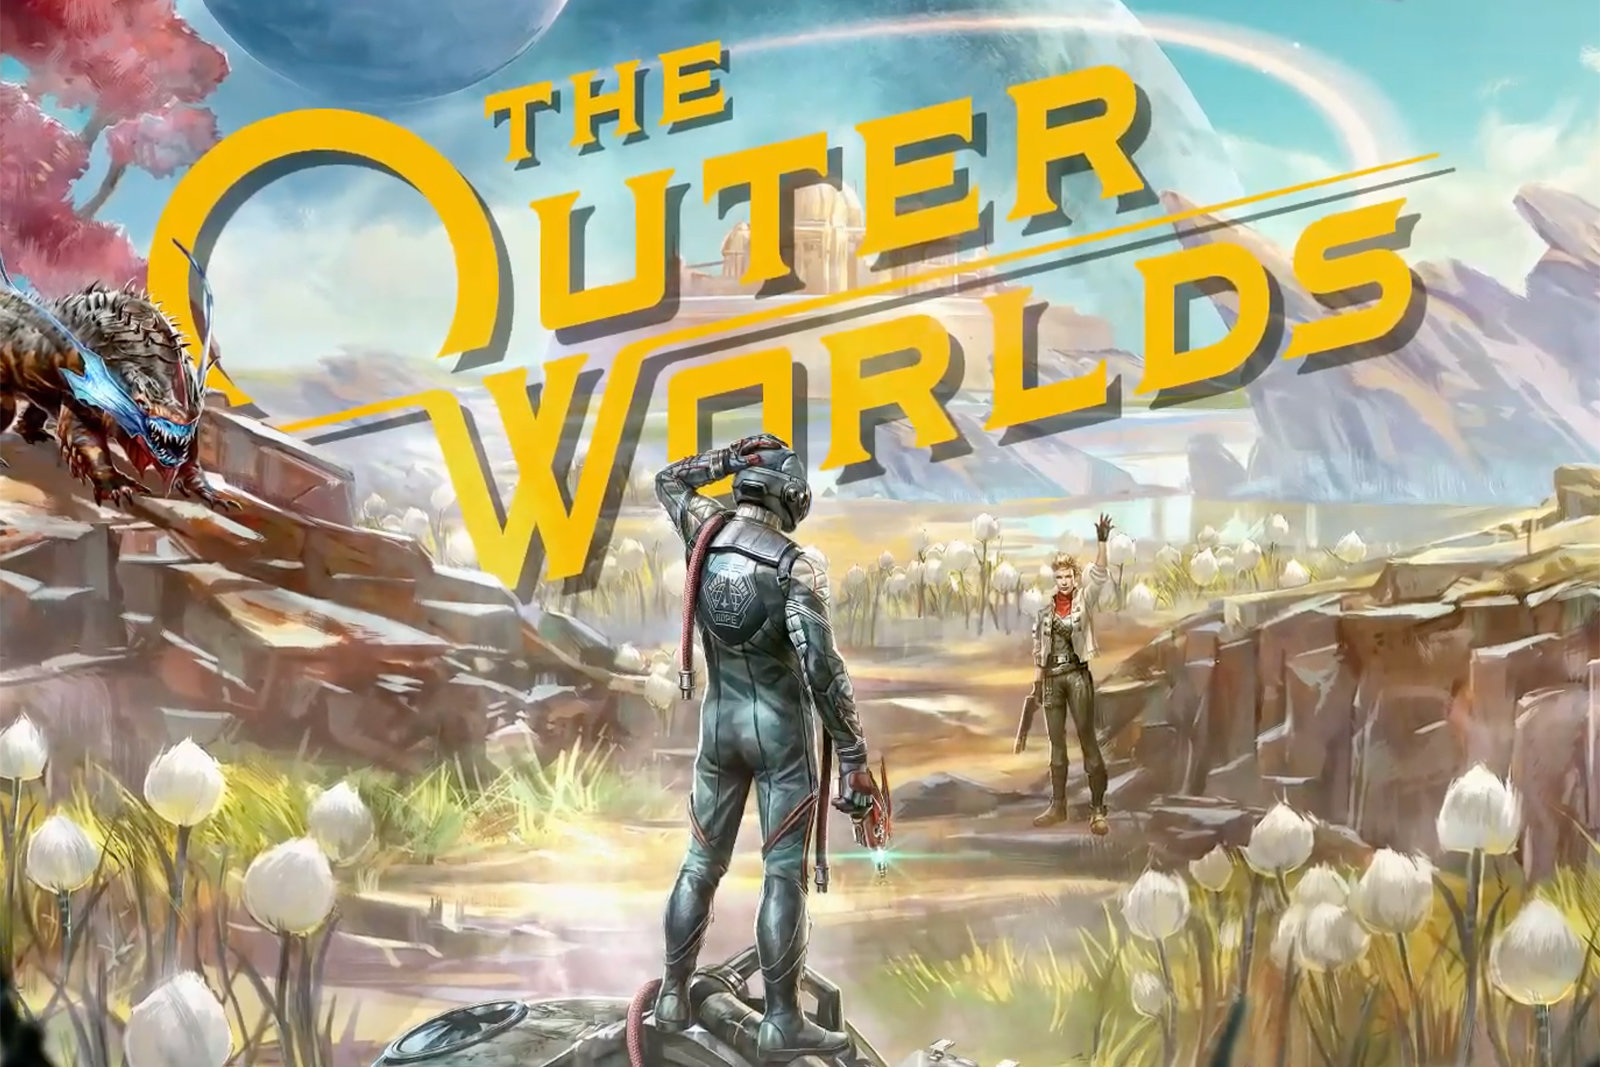 New The Outer Worlds Gameplay has Been Released - Campaign Length Confirmed  - OC3D